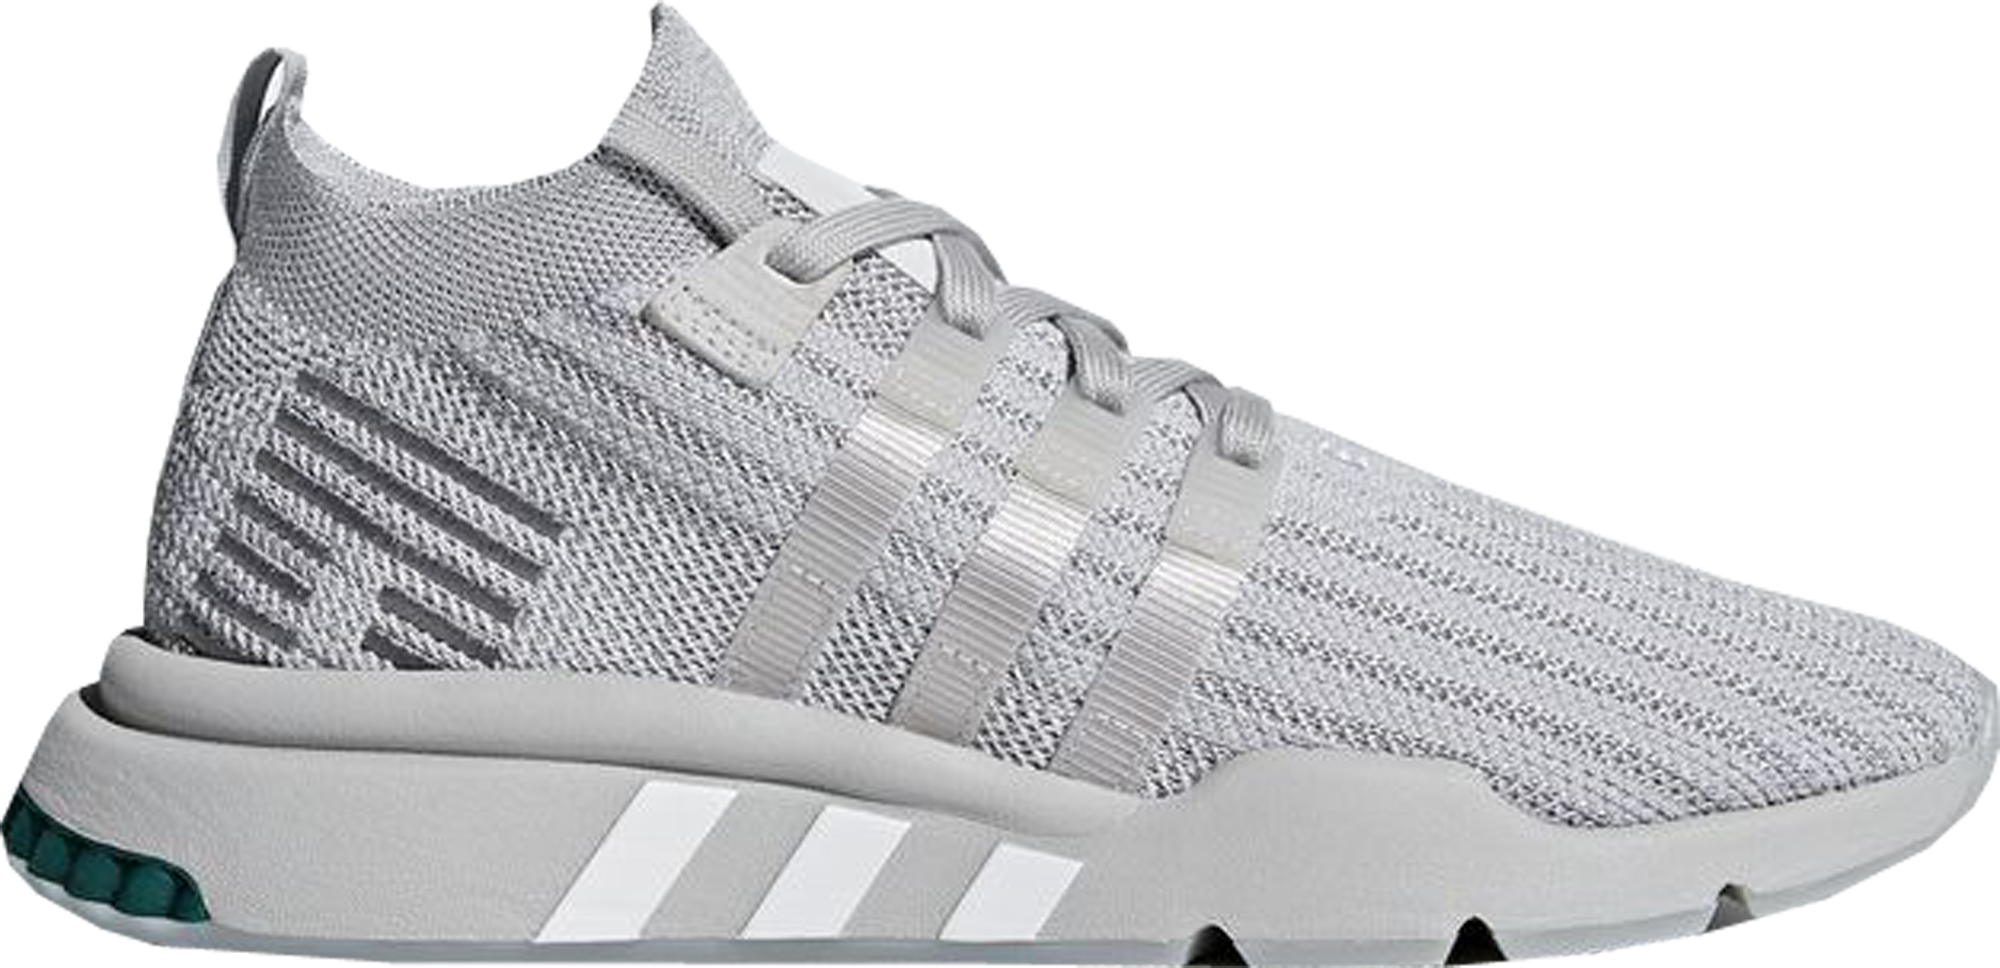 adidas eqt support mid adv review